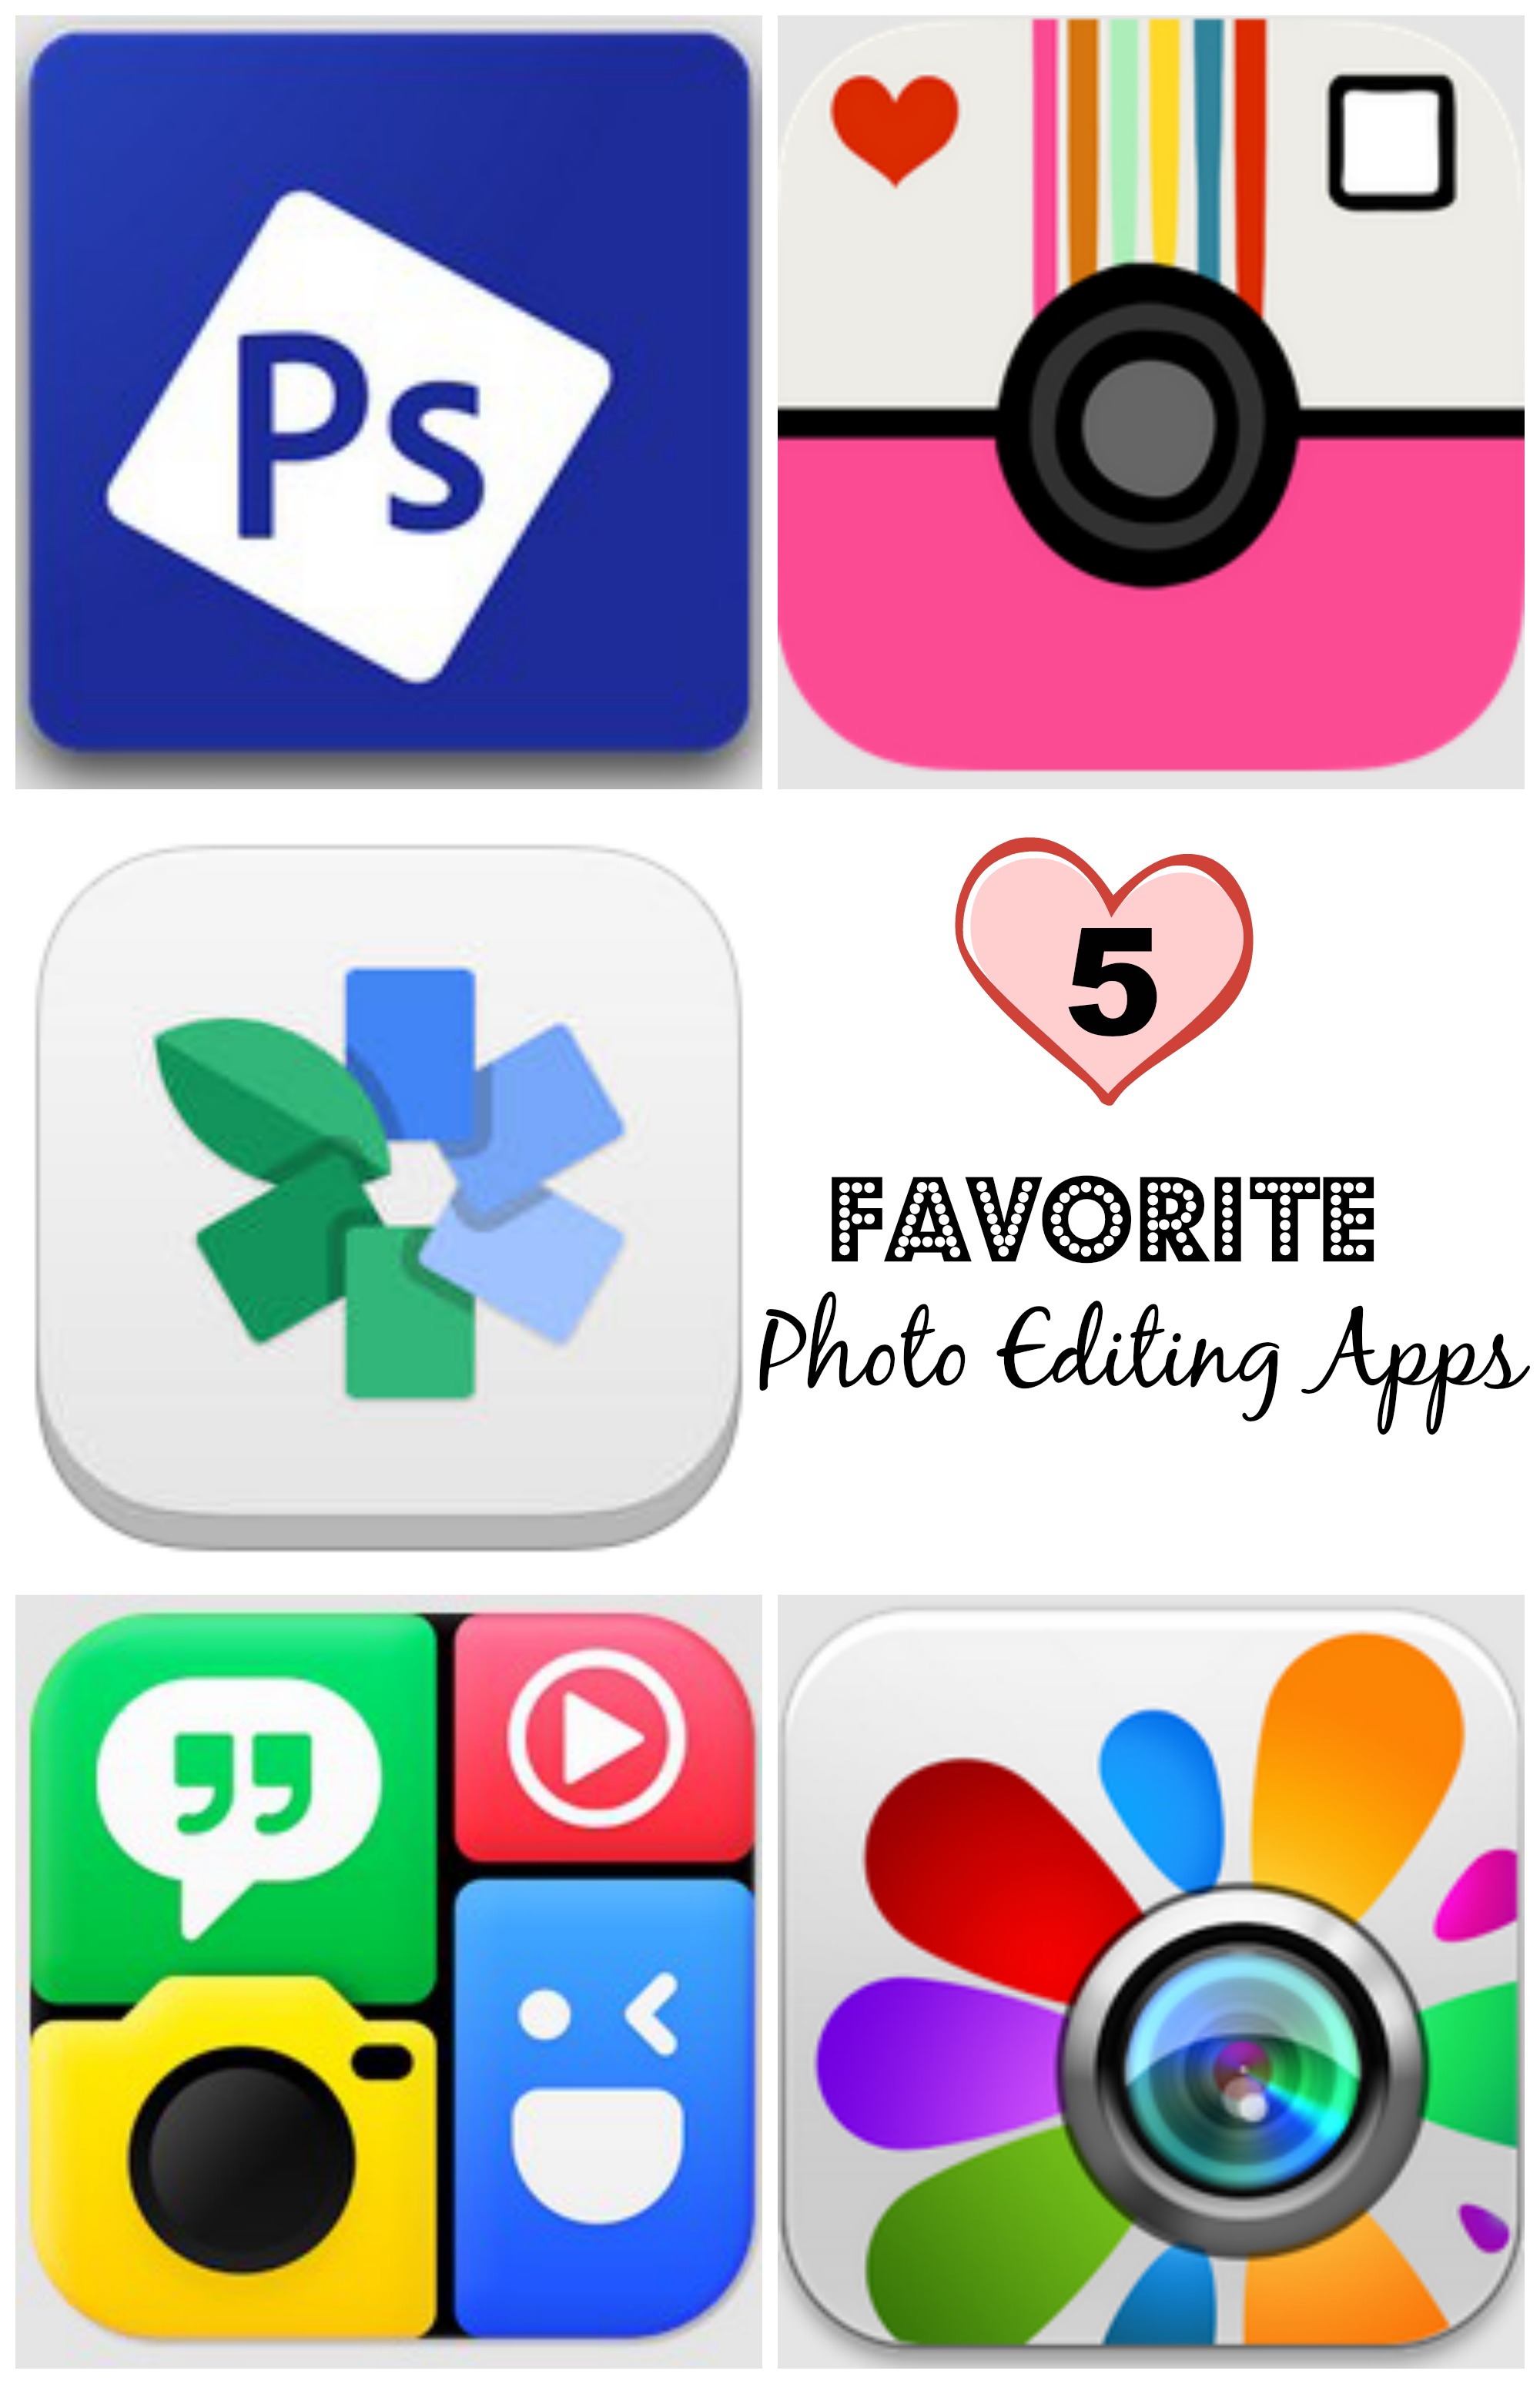 good free youtube editing apps